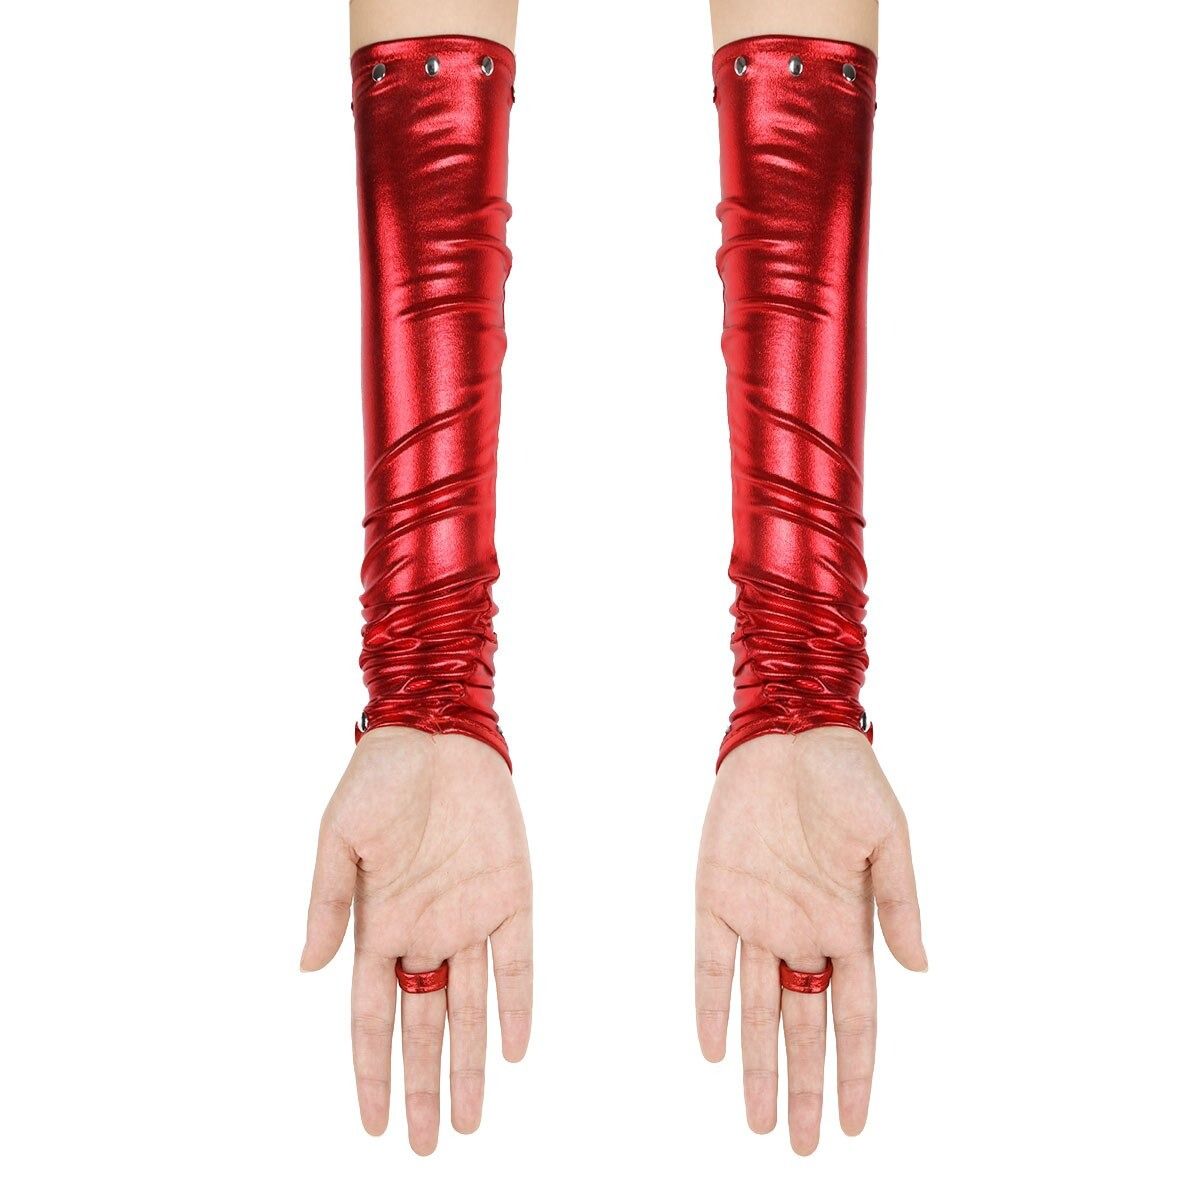 Women's PU Leather Long Gloves with Rivets / Goth Punk Fingerless Gloves - HARD'N'HEAVY